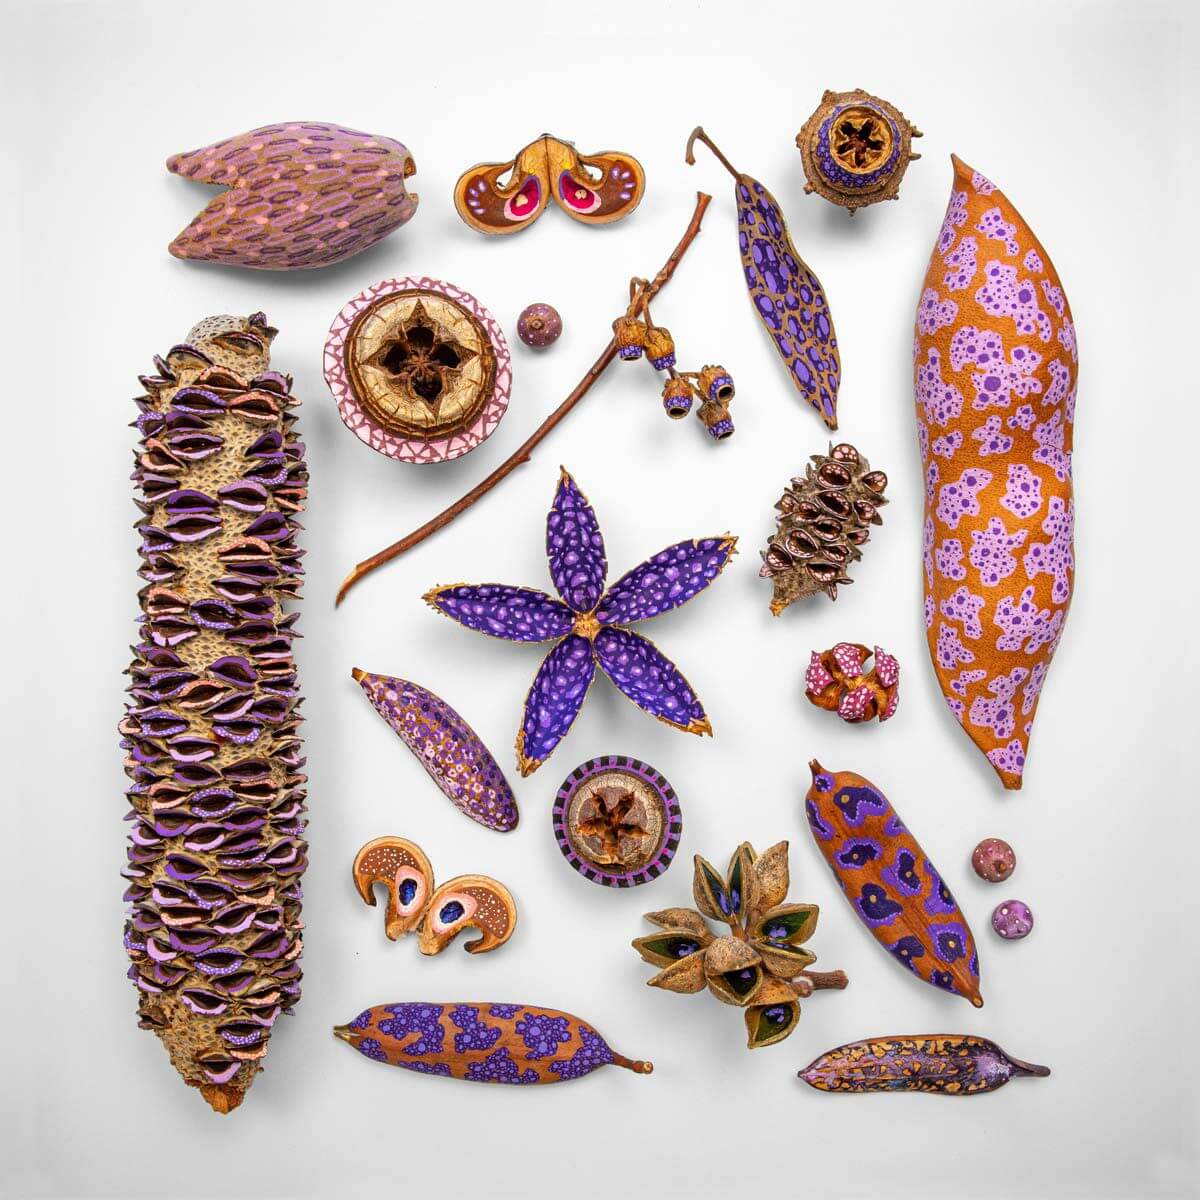 1. Collection of various seed pods, leaves and tree matter painted with bright designs.